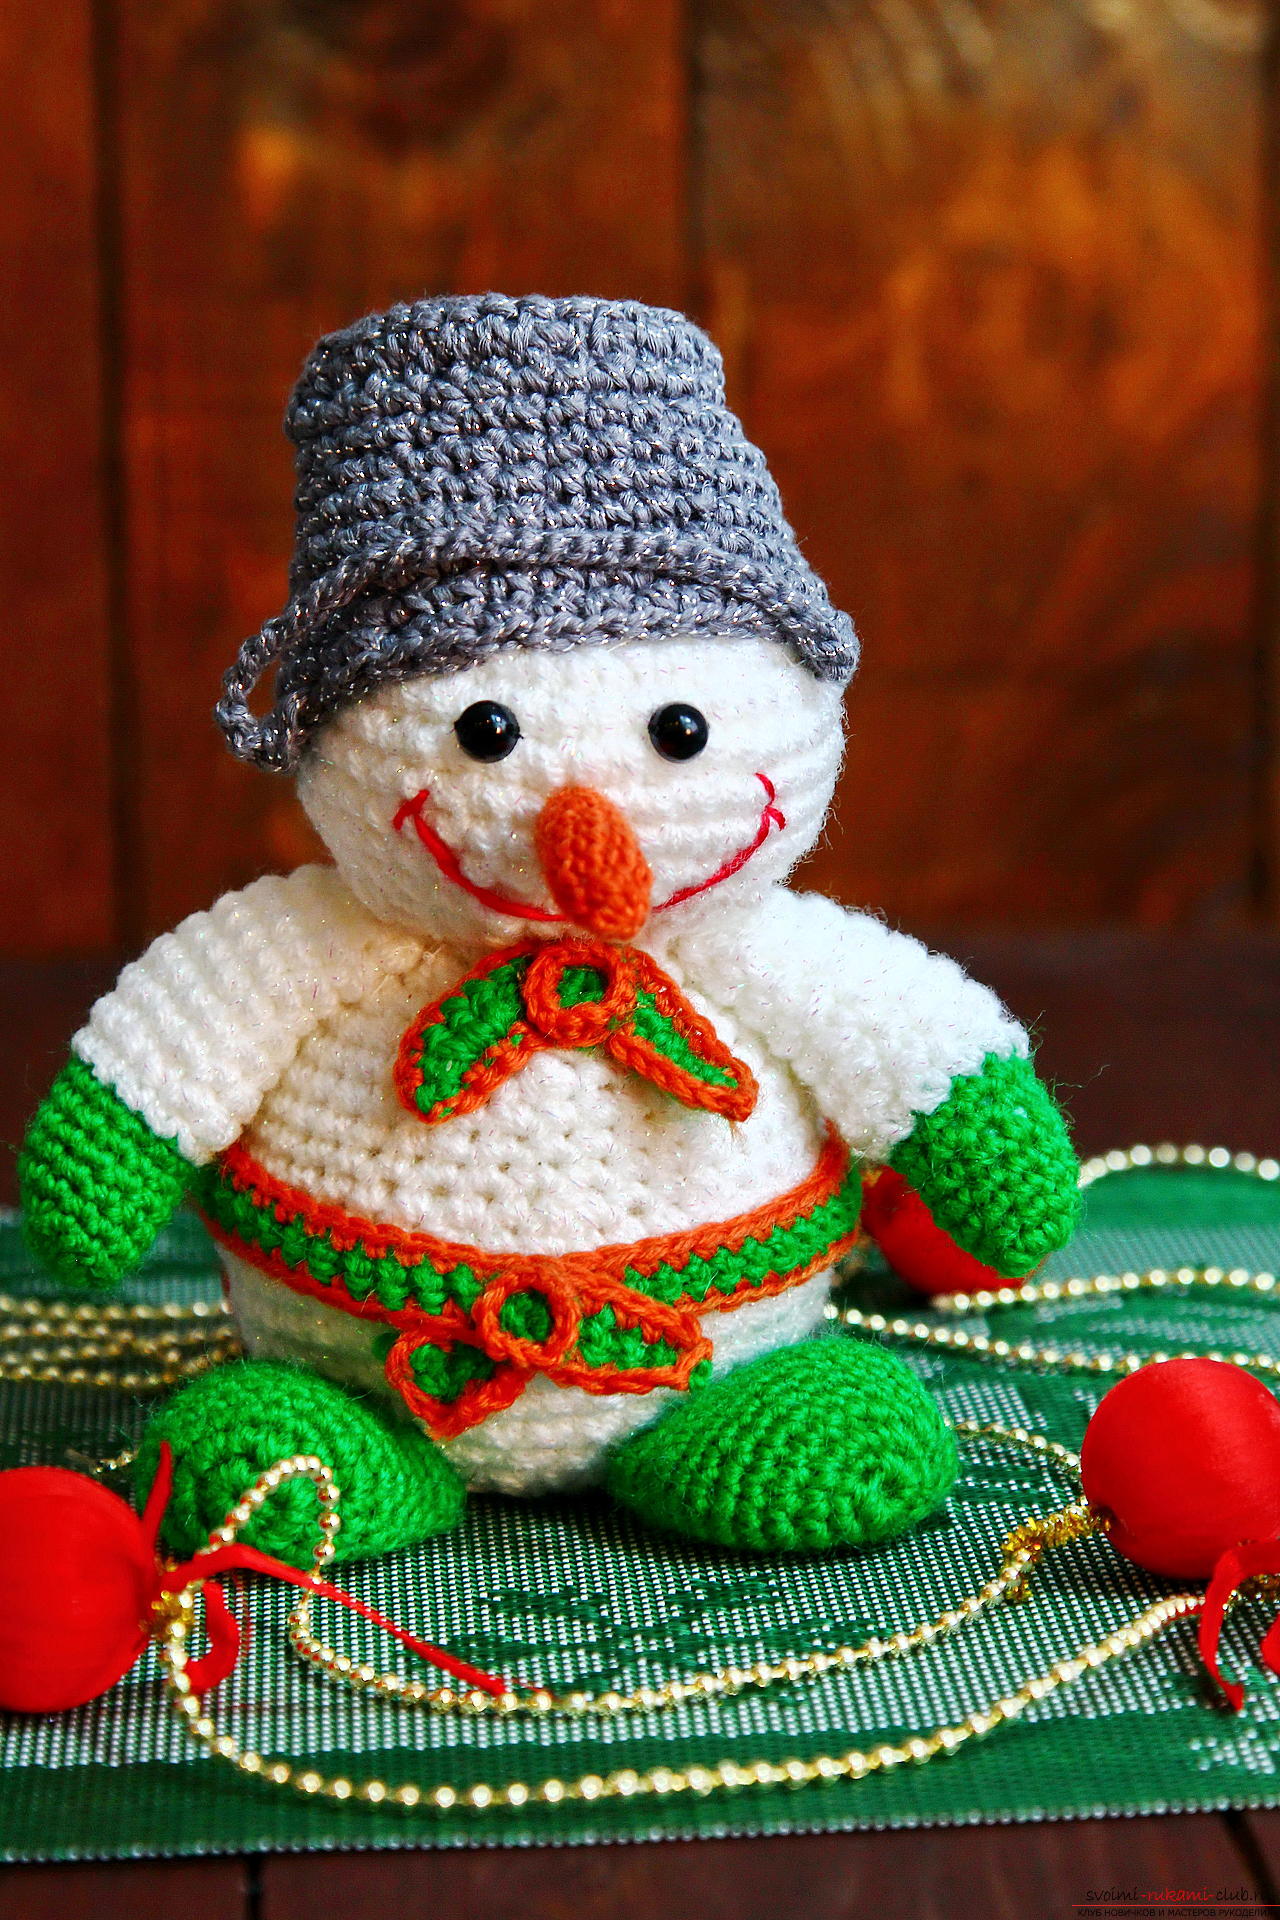 We knit a New Year's snowman with a crochet with a detailed master class, supplemented by step-by-step photos. Photo number 36